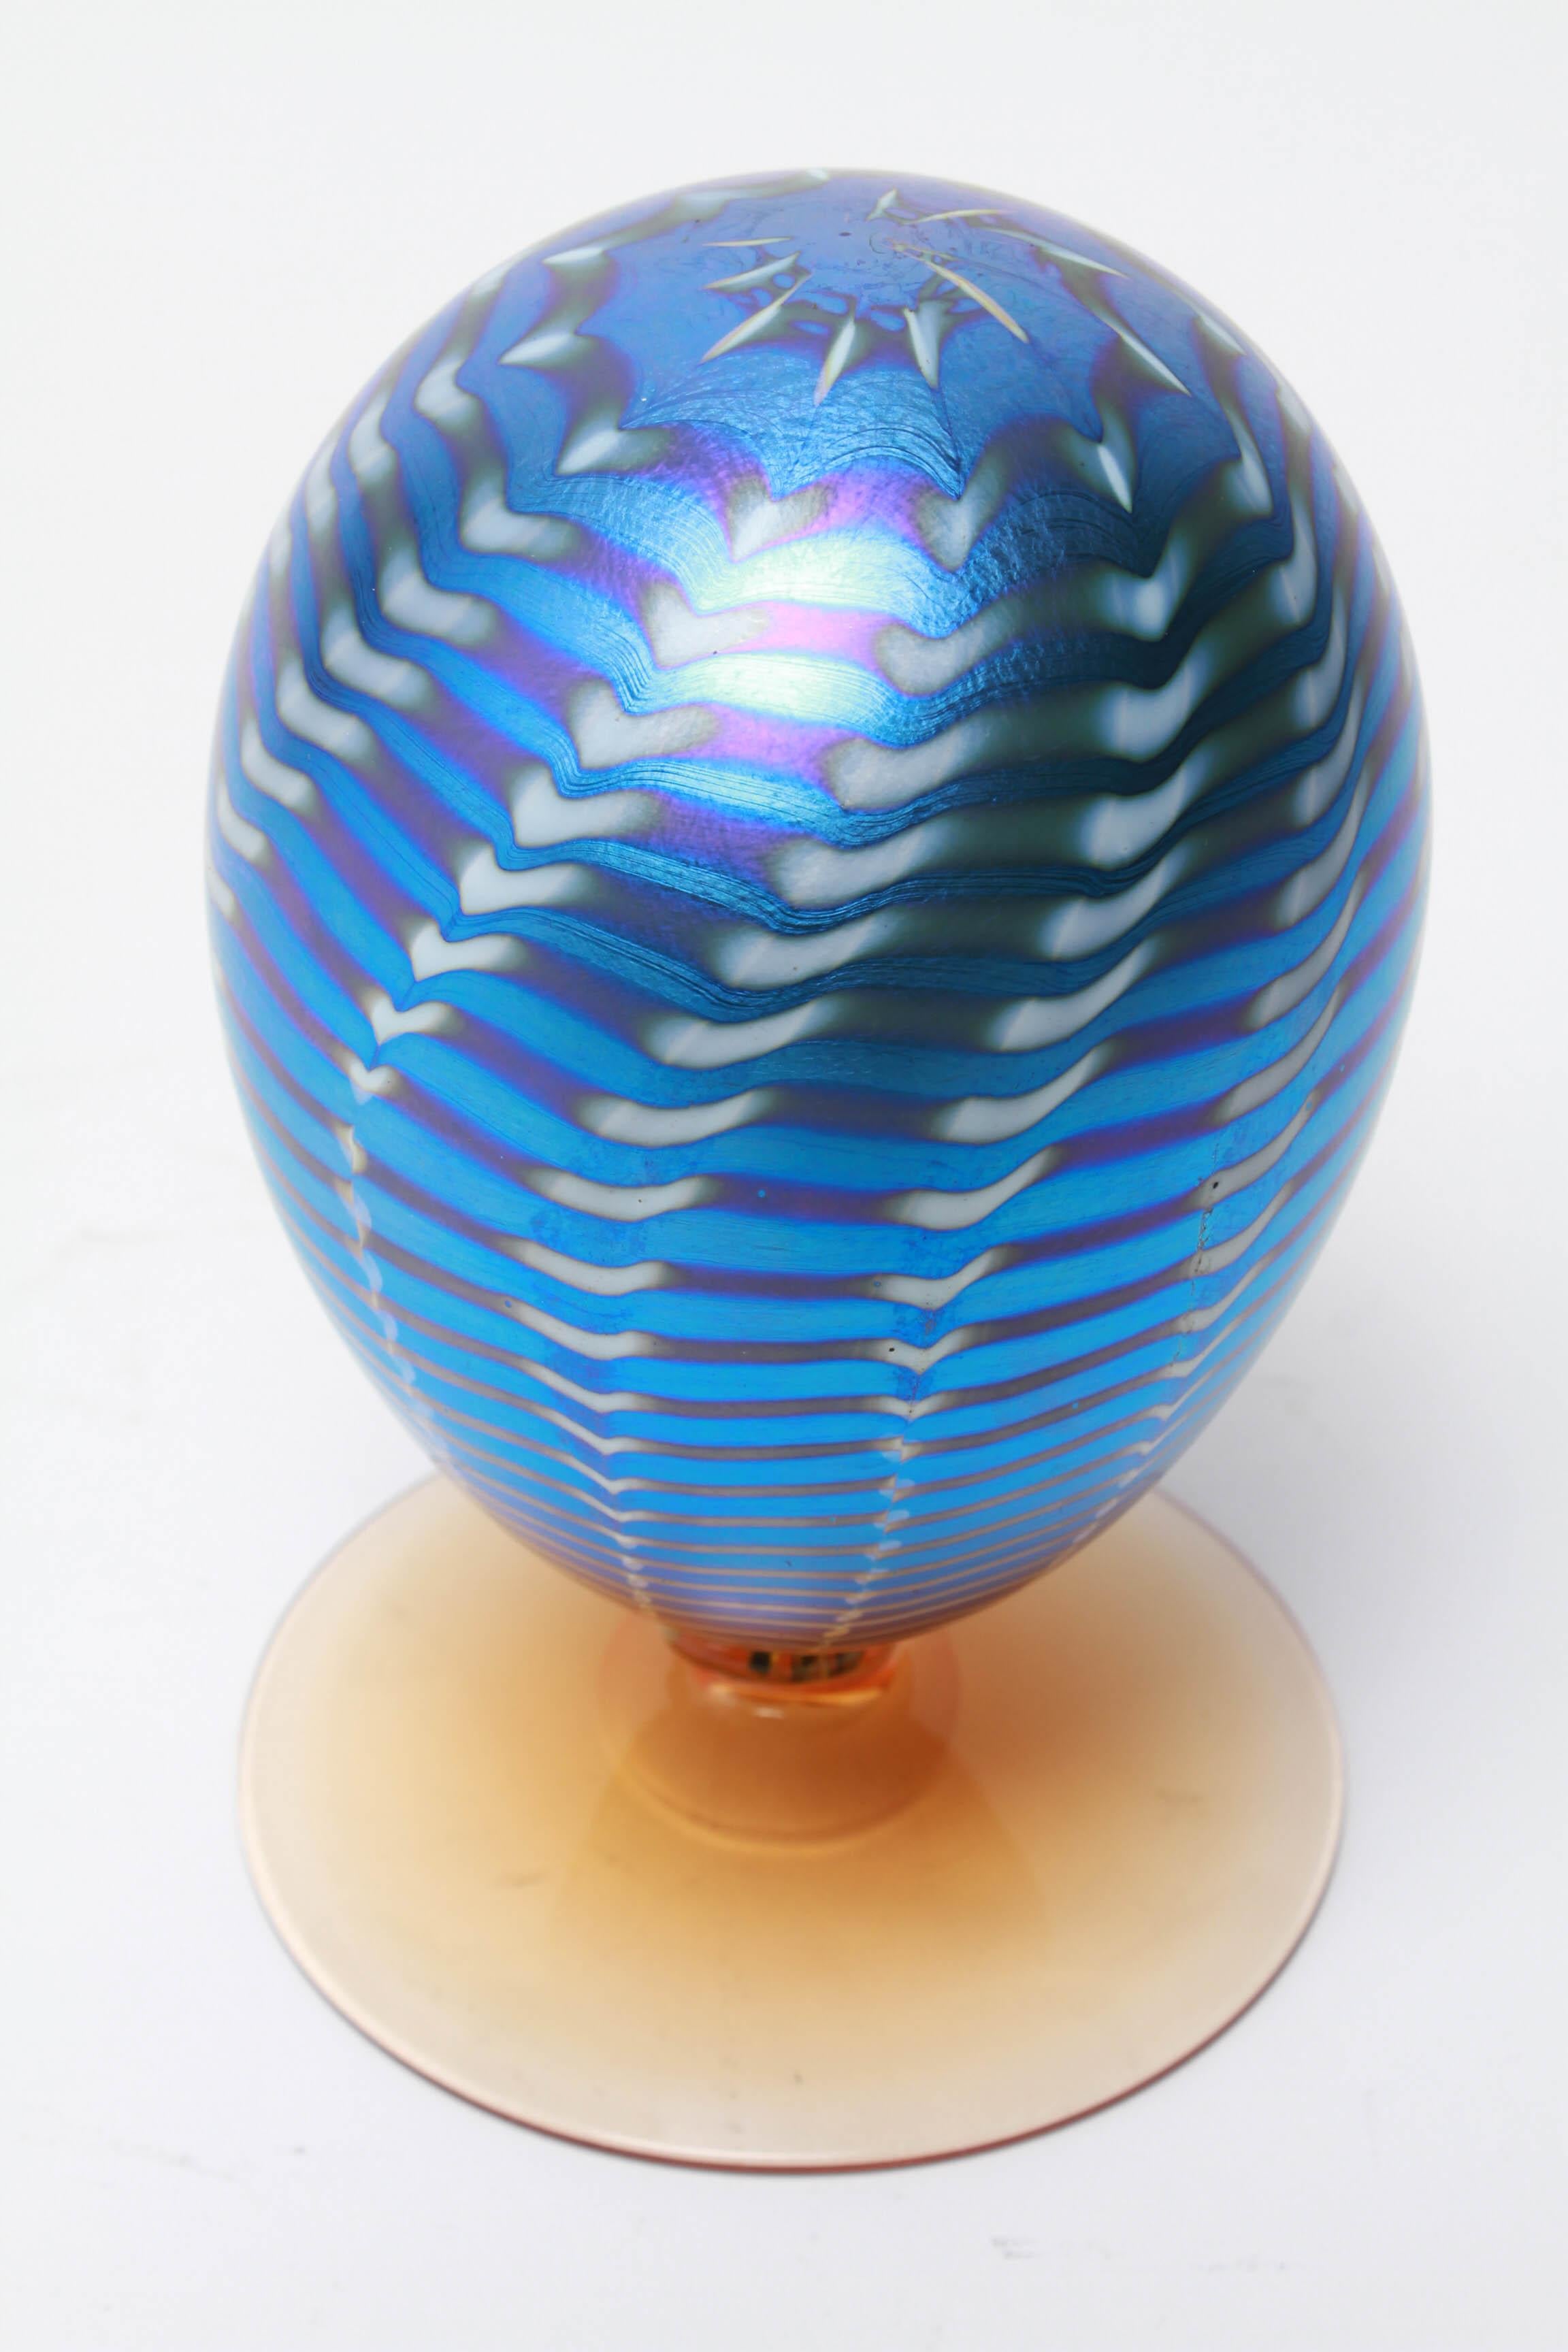 Tiffany style iridescent pulled-feather art glass egg on an orange glass base. The piece is in great vintage condition with age-appropriate wear.